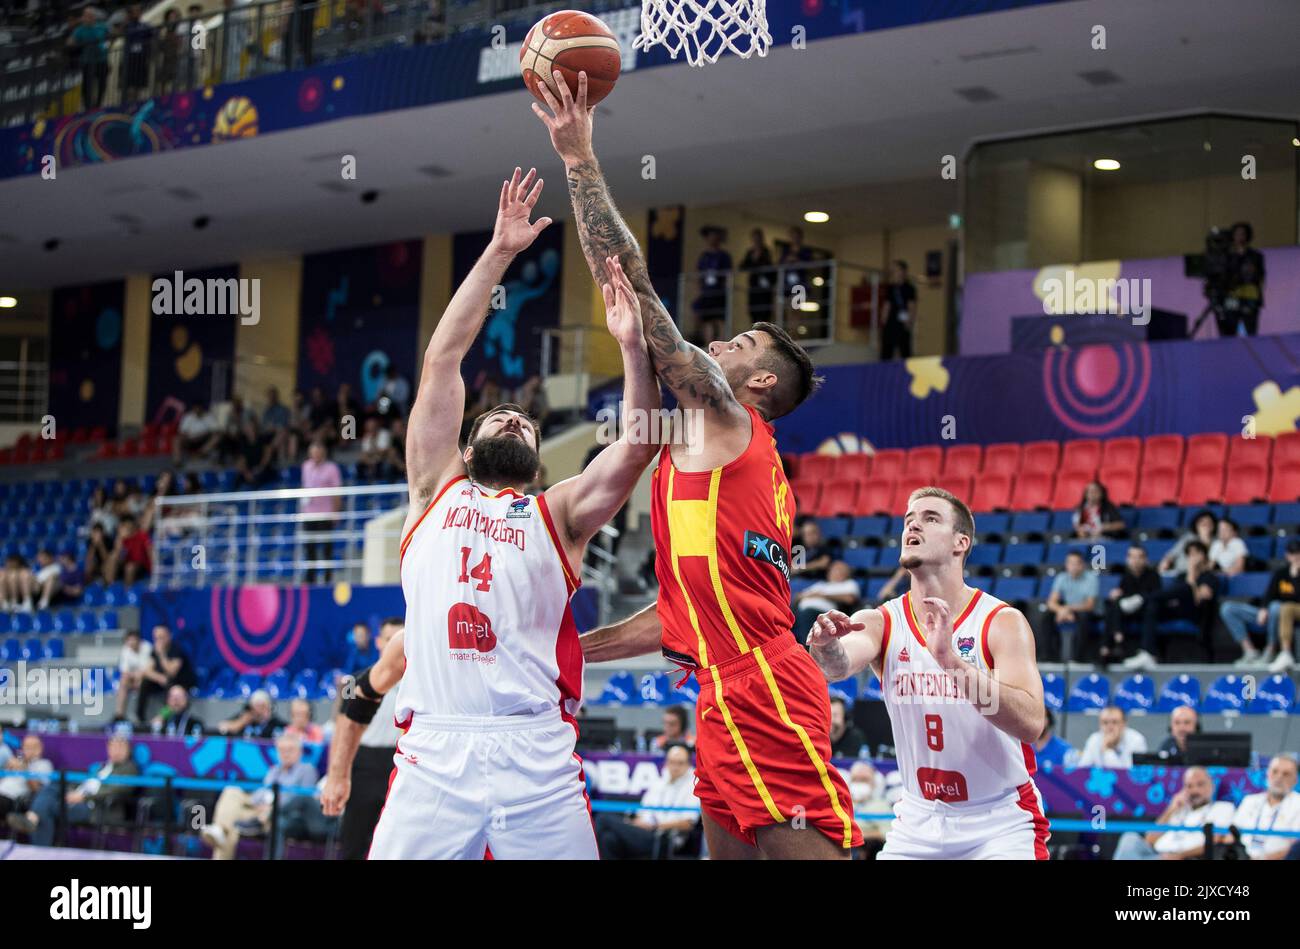 Tbilisi, Georgia, 6th September 2022. Bojan Dubljevic of Montenegro and Willy Hernangomze of Spain in action under the basket during the FIBA EuroBasket 2022 group A match between Montenegro and Spain at Tbilisi Arena in Tbilisi, Georgia. September 6, 2022. Credit: Nikola Krstic/Alamy Stock Photo